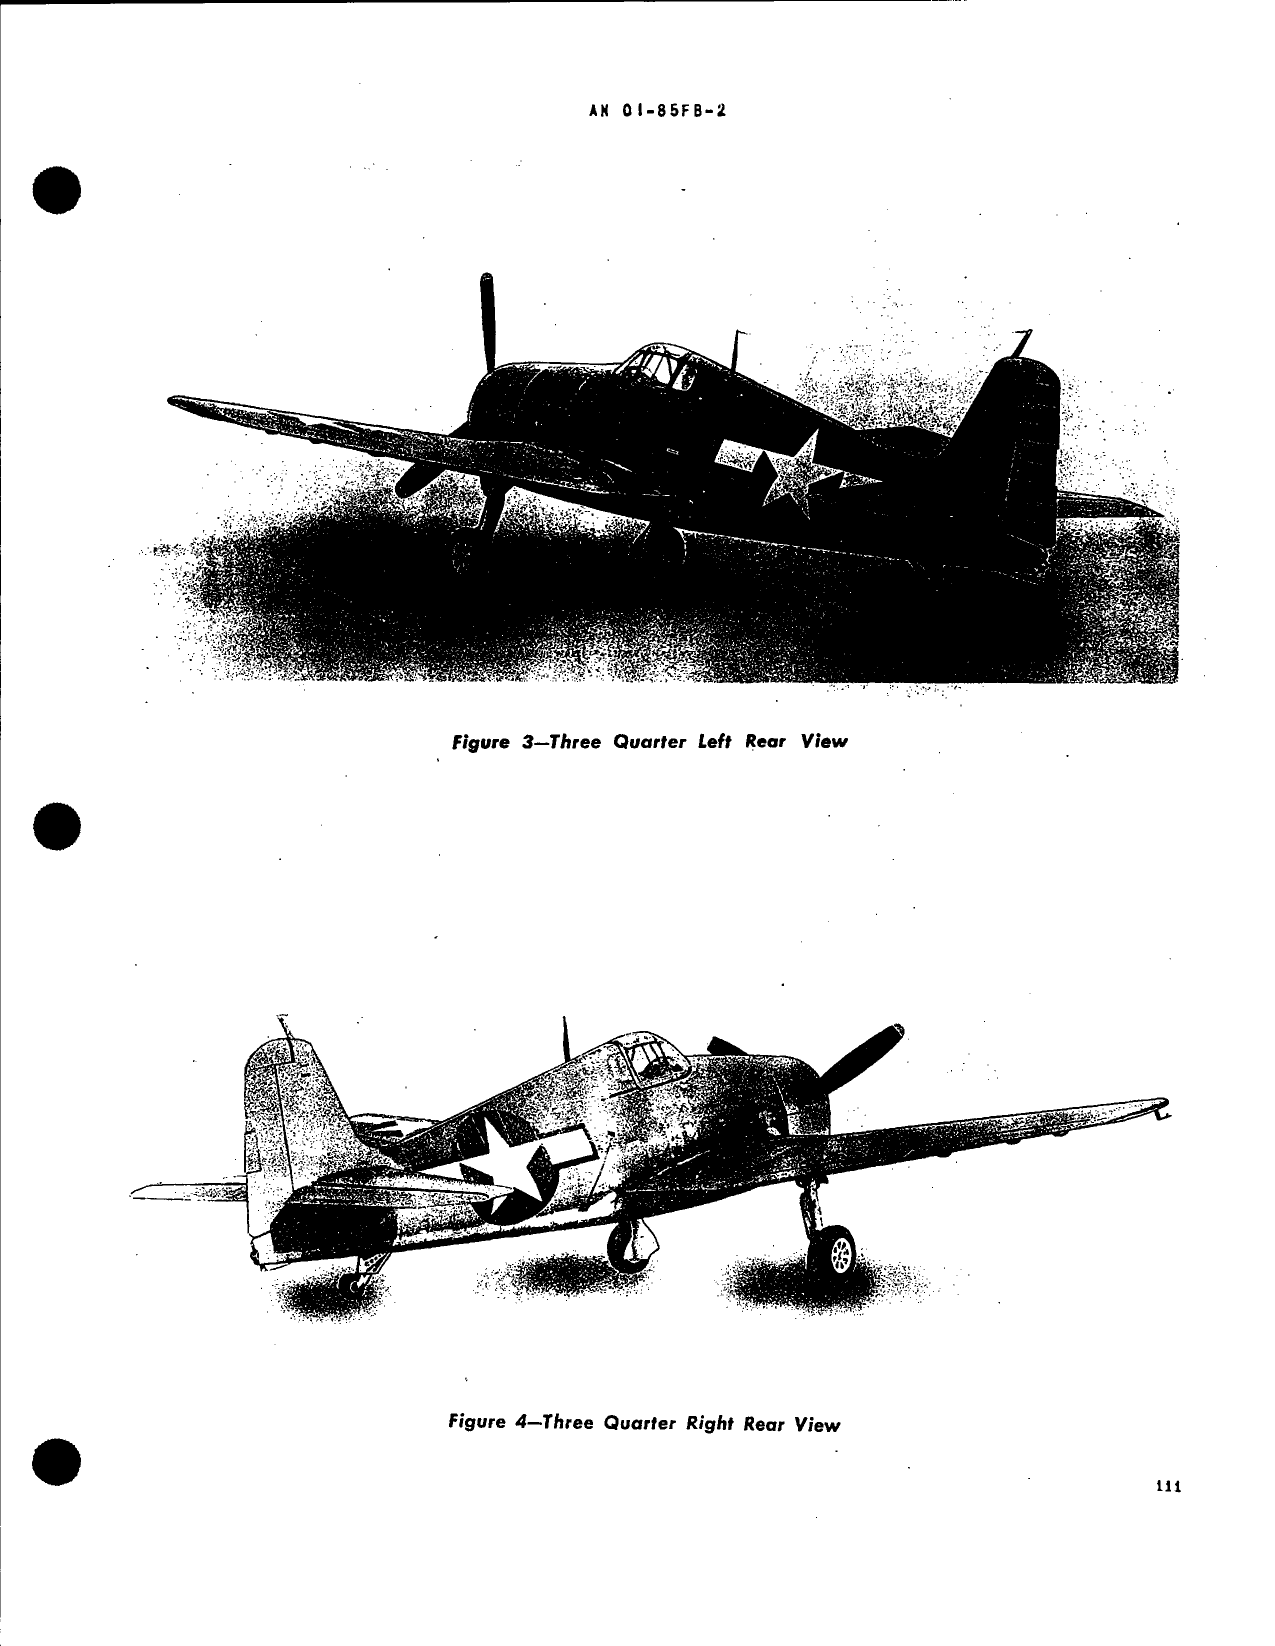 Sample page 5 from AirCorps Library document: Erection and Maintenance Manual for Navy Models F6F-3, -3N, -5 and -5N